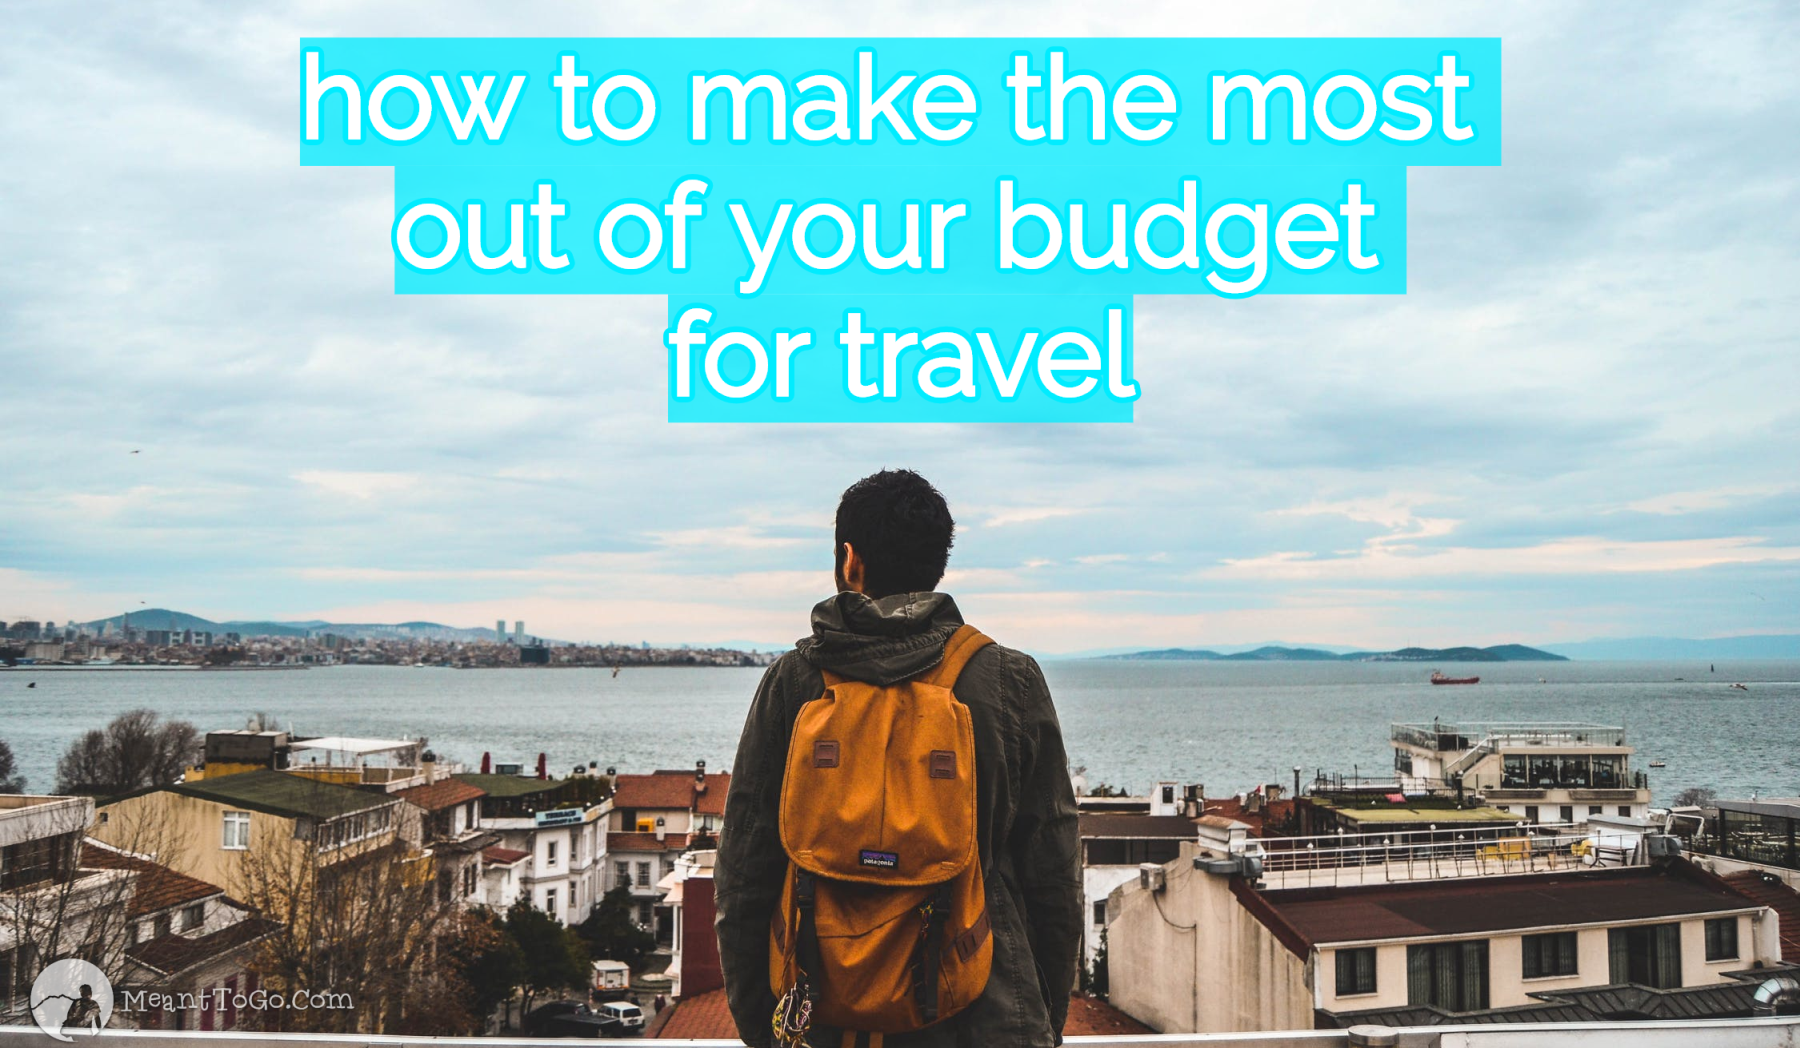 Budget travel tips from a solo traveler